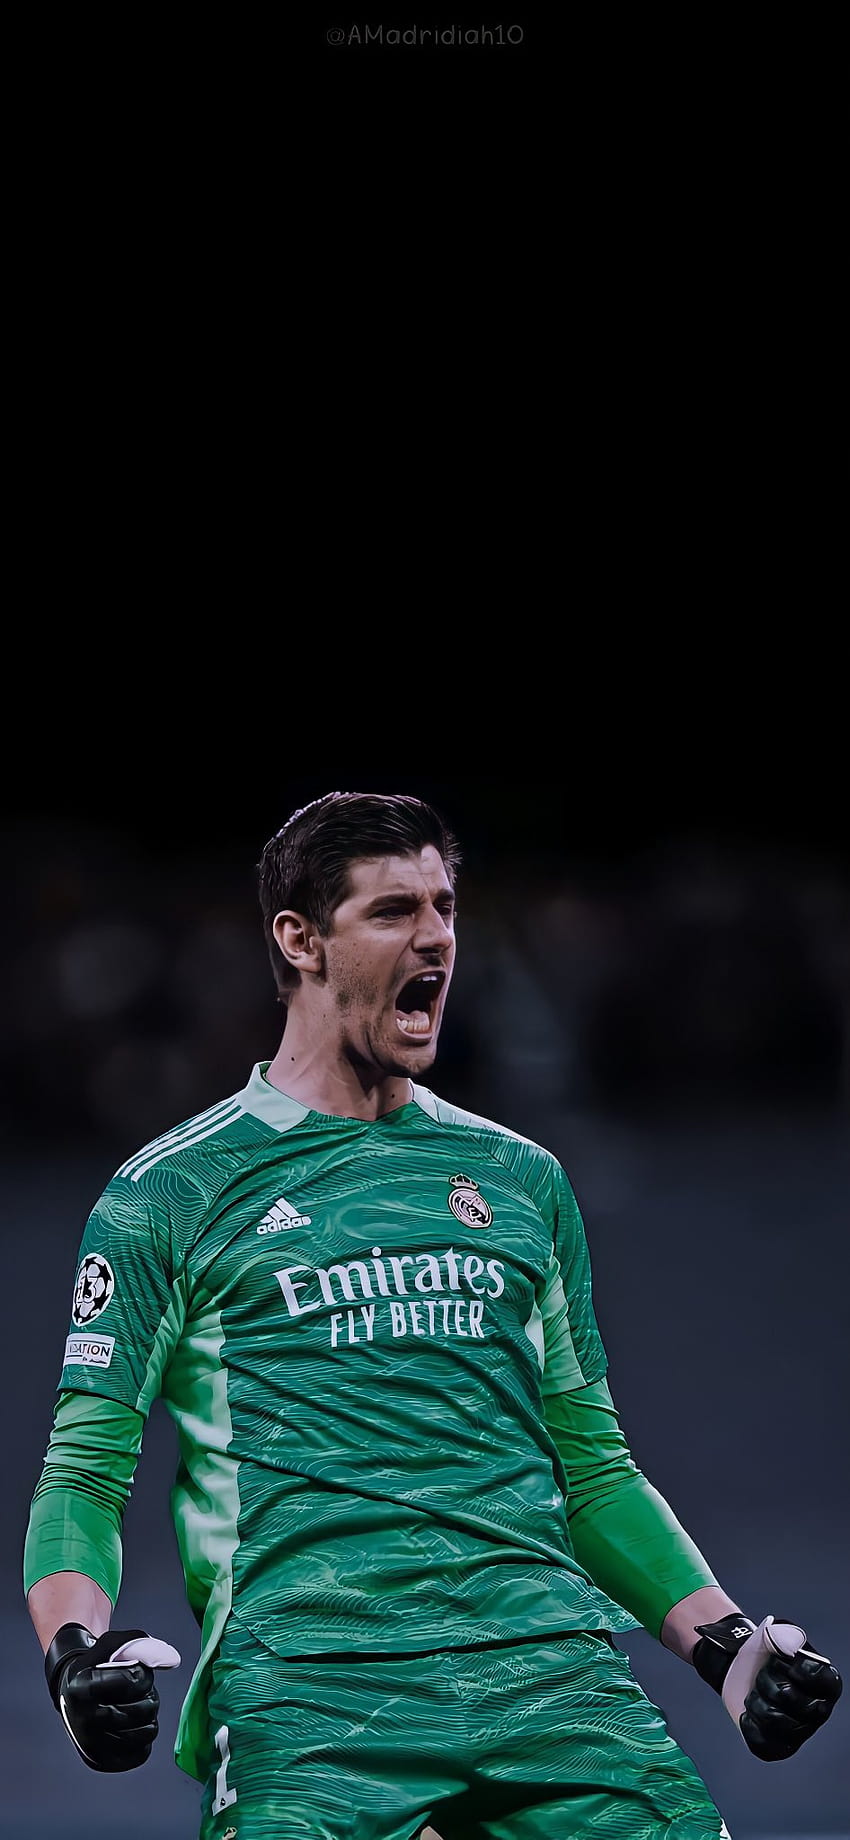 Courtois worlds best  will shatter records at Real Madrid  Belgium boss  talks up Blancos keeper thibaut courtois real madrid HD wallpaper  Pxfuel